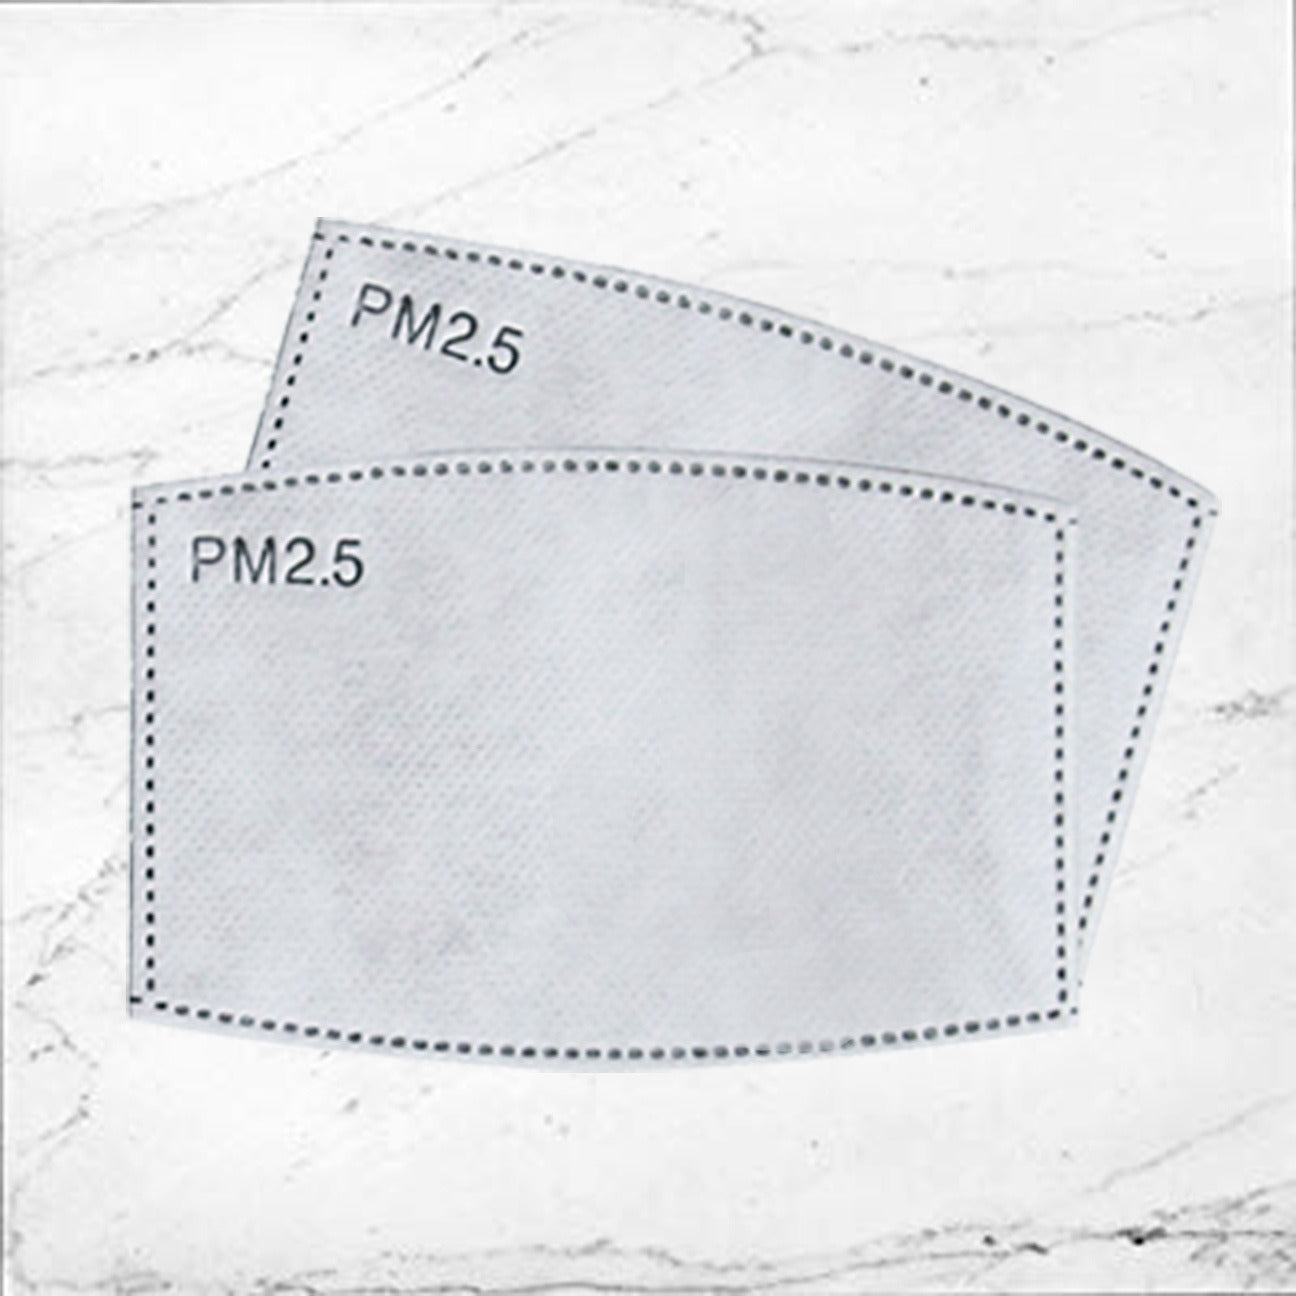 PM 2.5 5-Layer filter insert for fabric masks